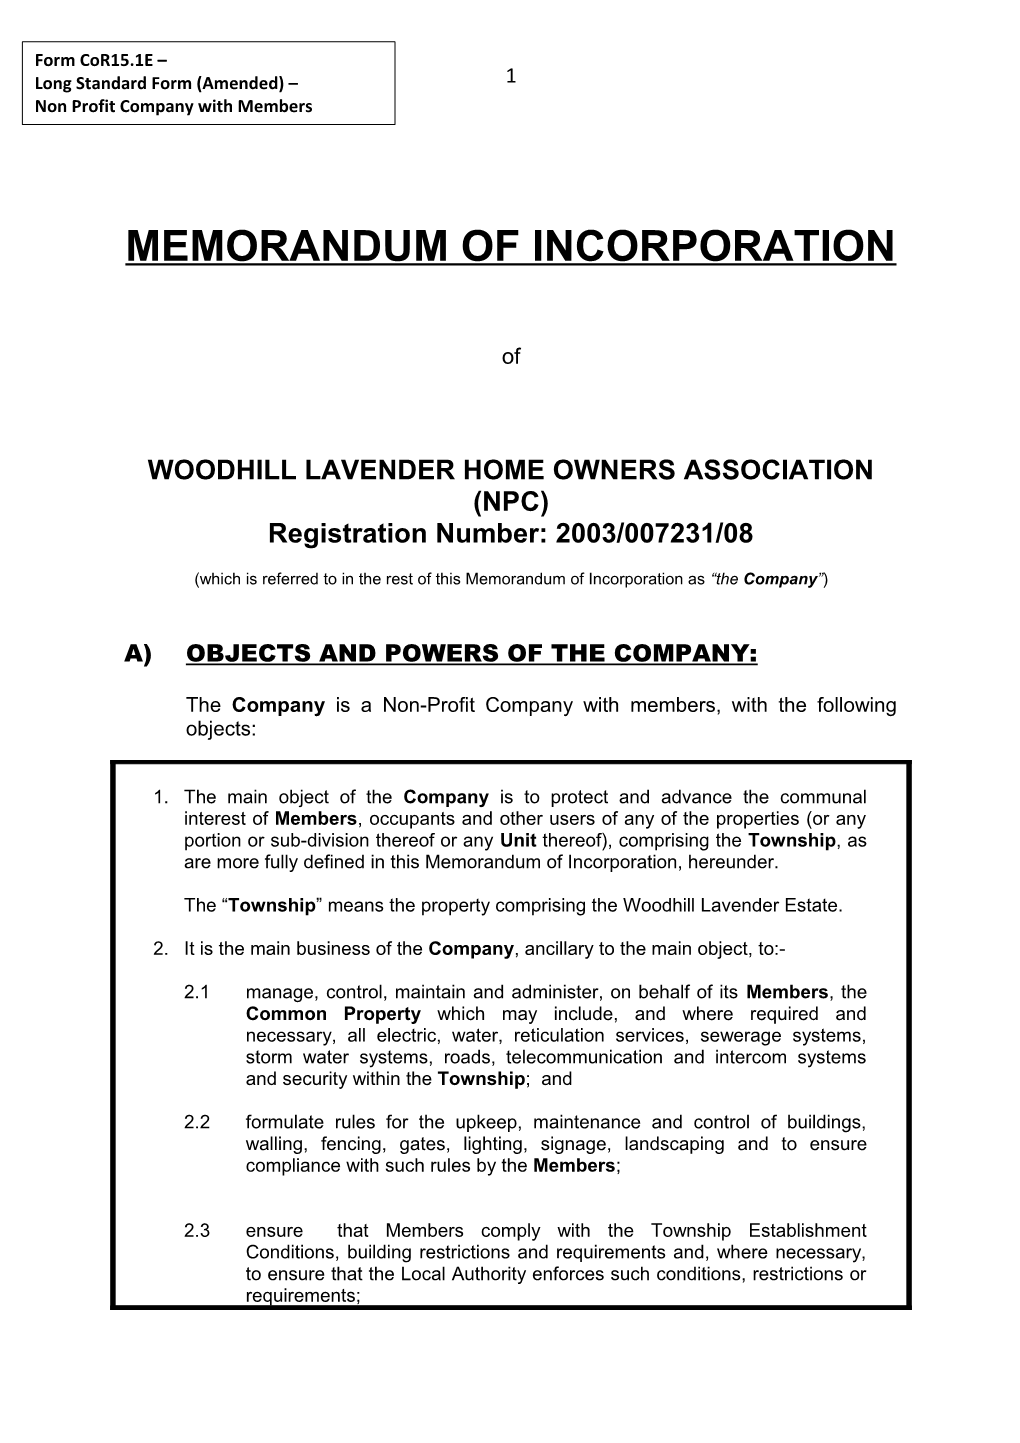 Woodhill Lavender Home Owners Association (Npc)